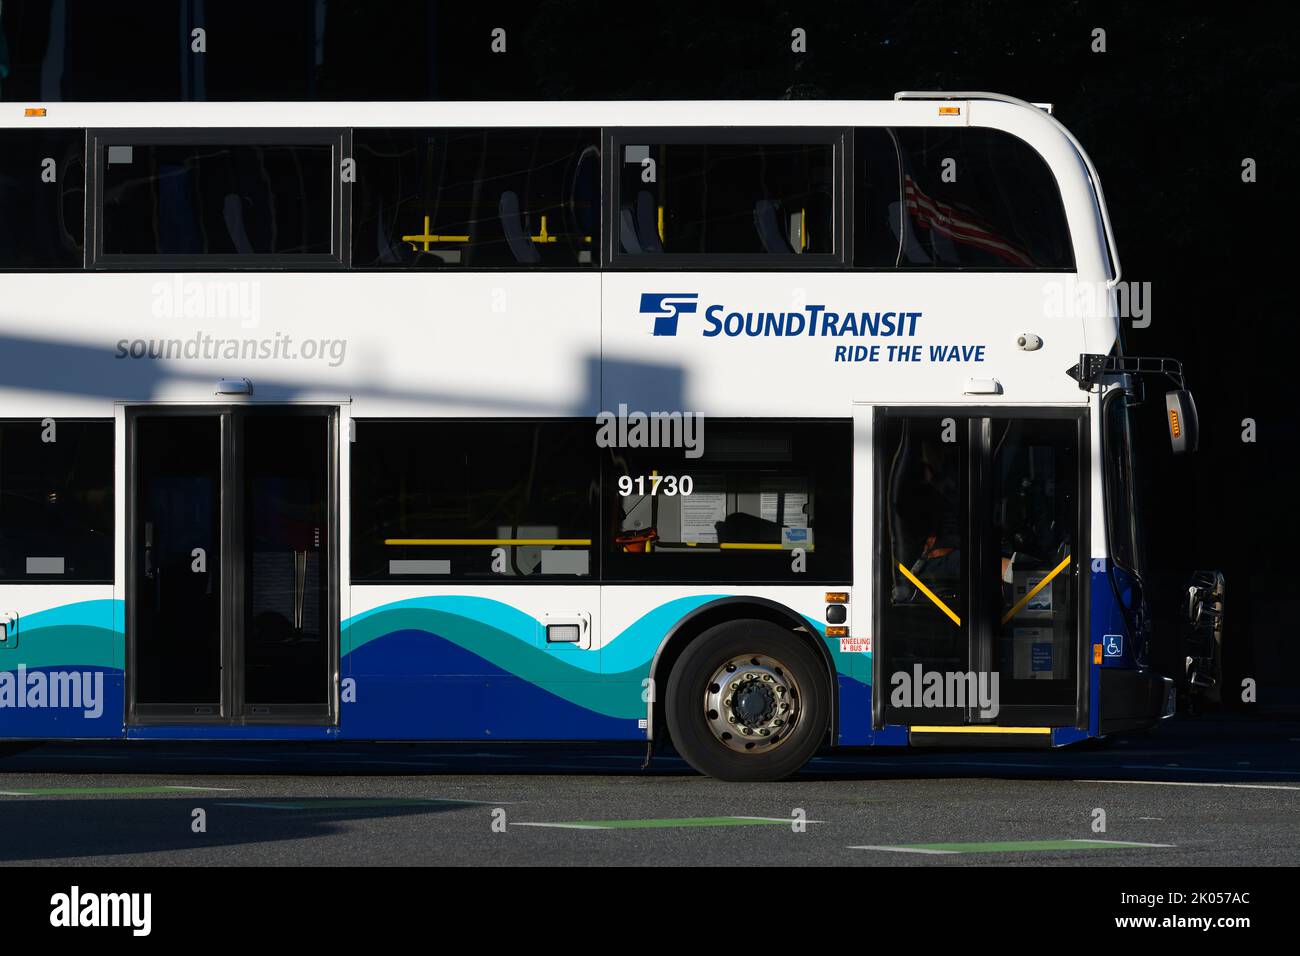 Bellevue, WA, USA - September 08, 2022; Sound Transit Ride the Wave double decker bus in profile in high contrast Stock Photo